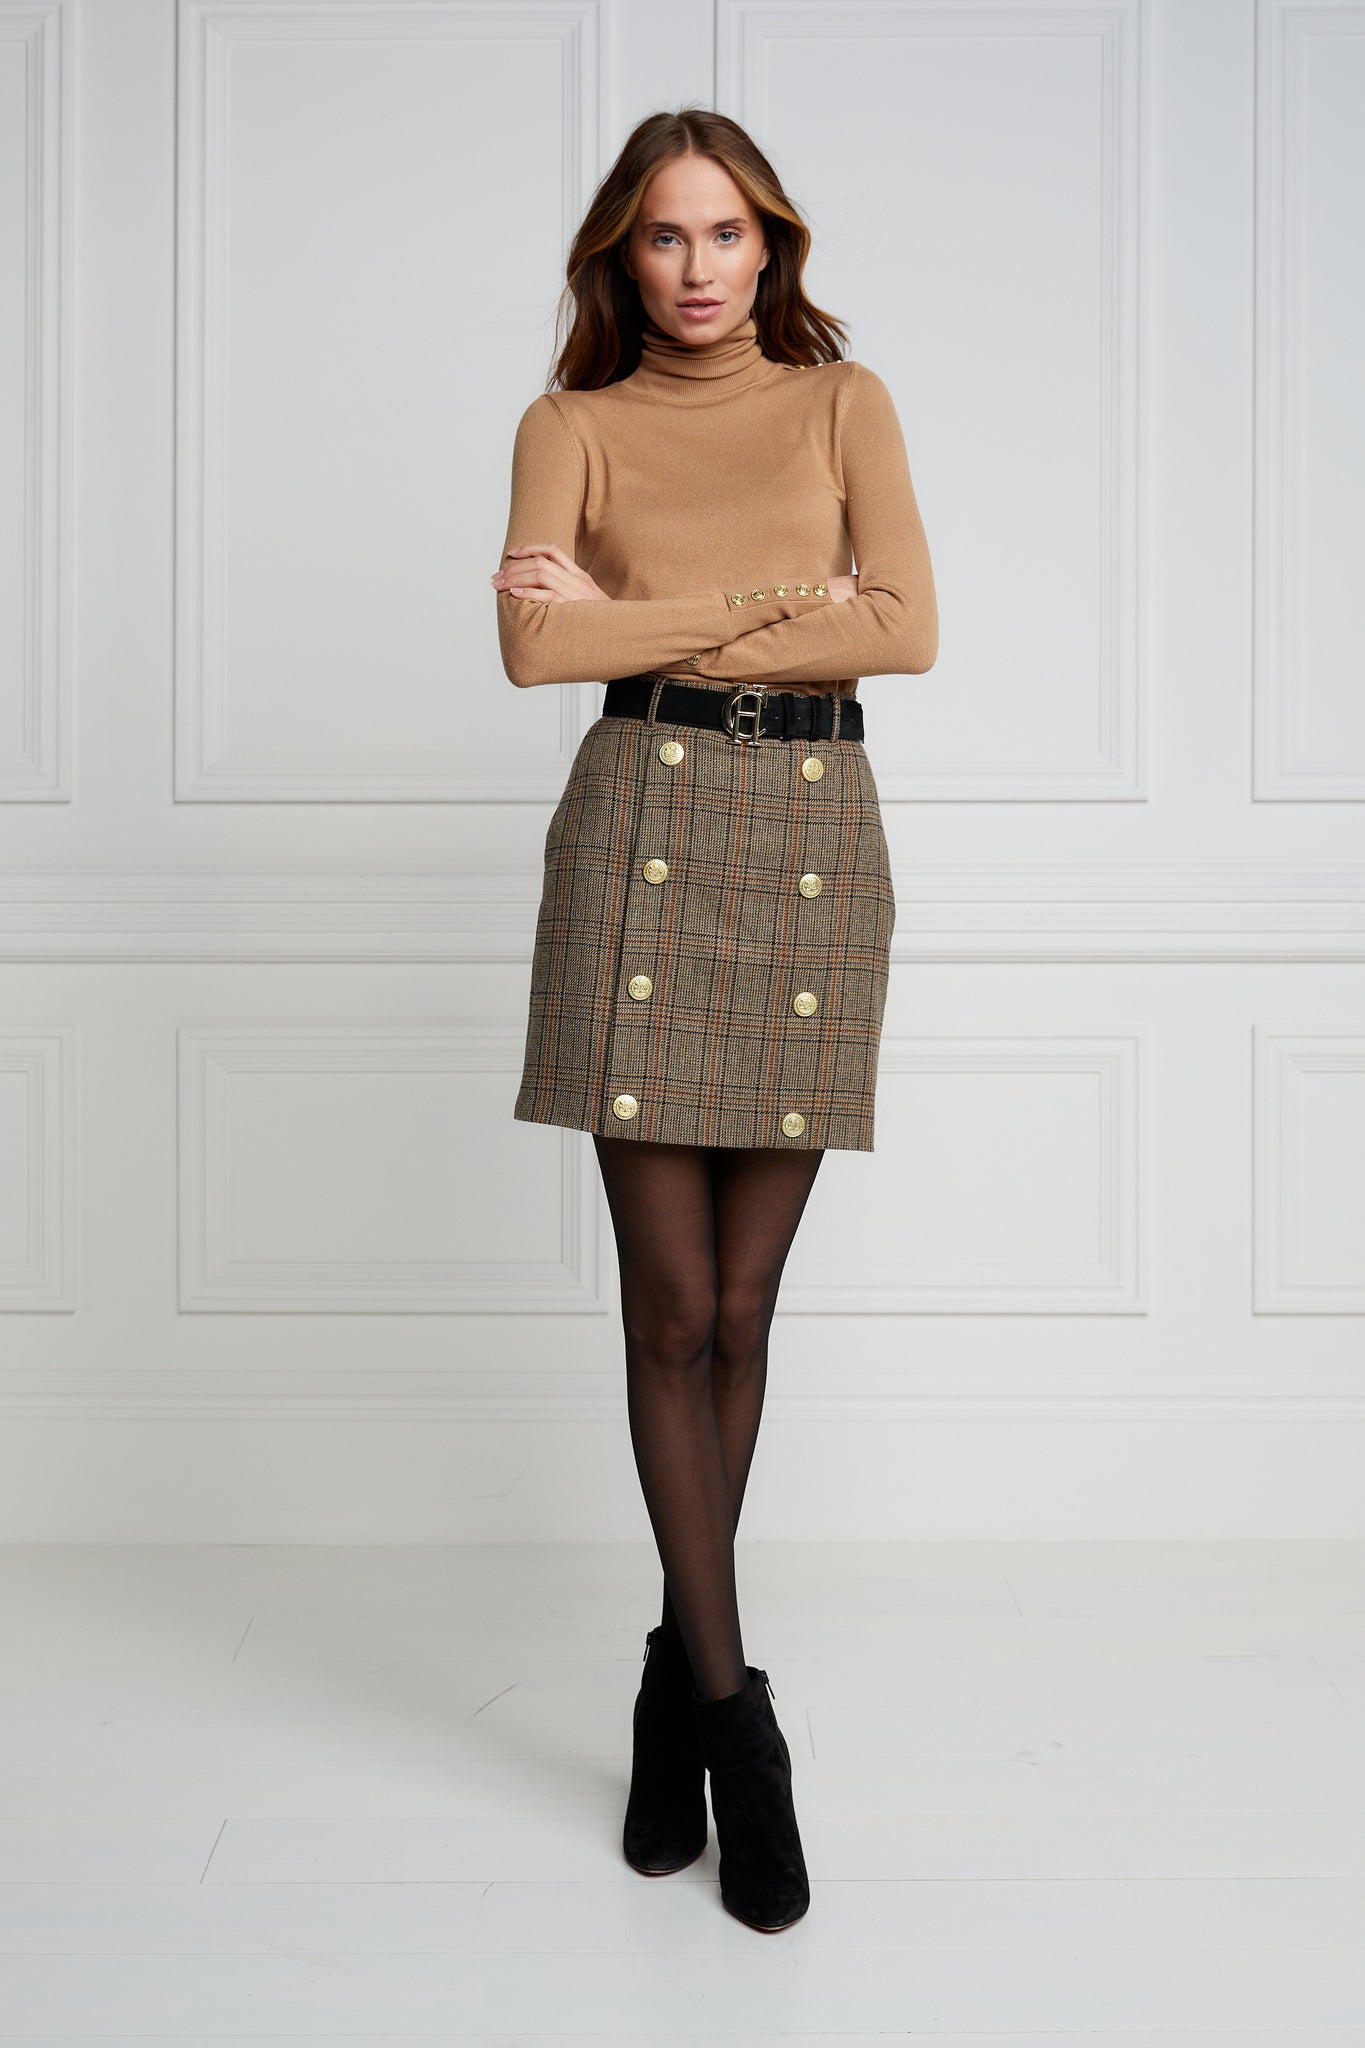 womens wool pencil mini skirt in green and red tweed check with concealed zip fastening on centre back and gold rivets down front